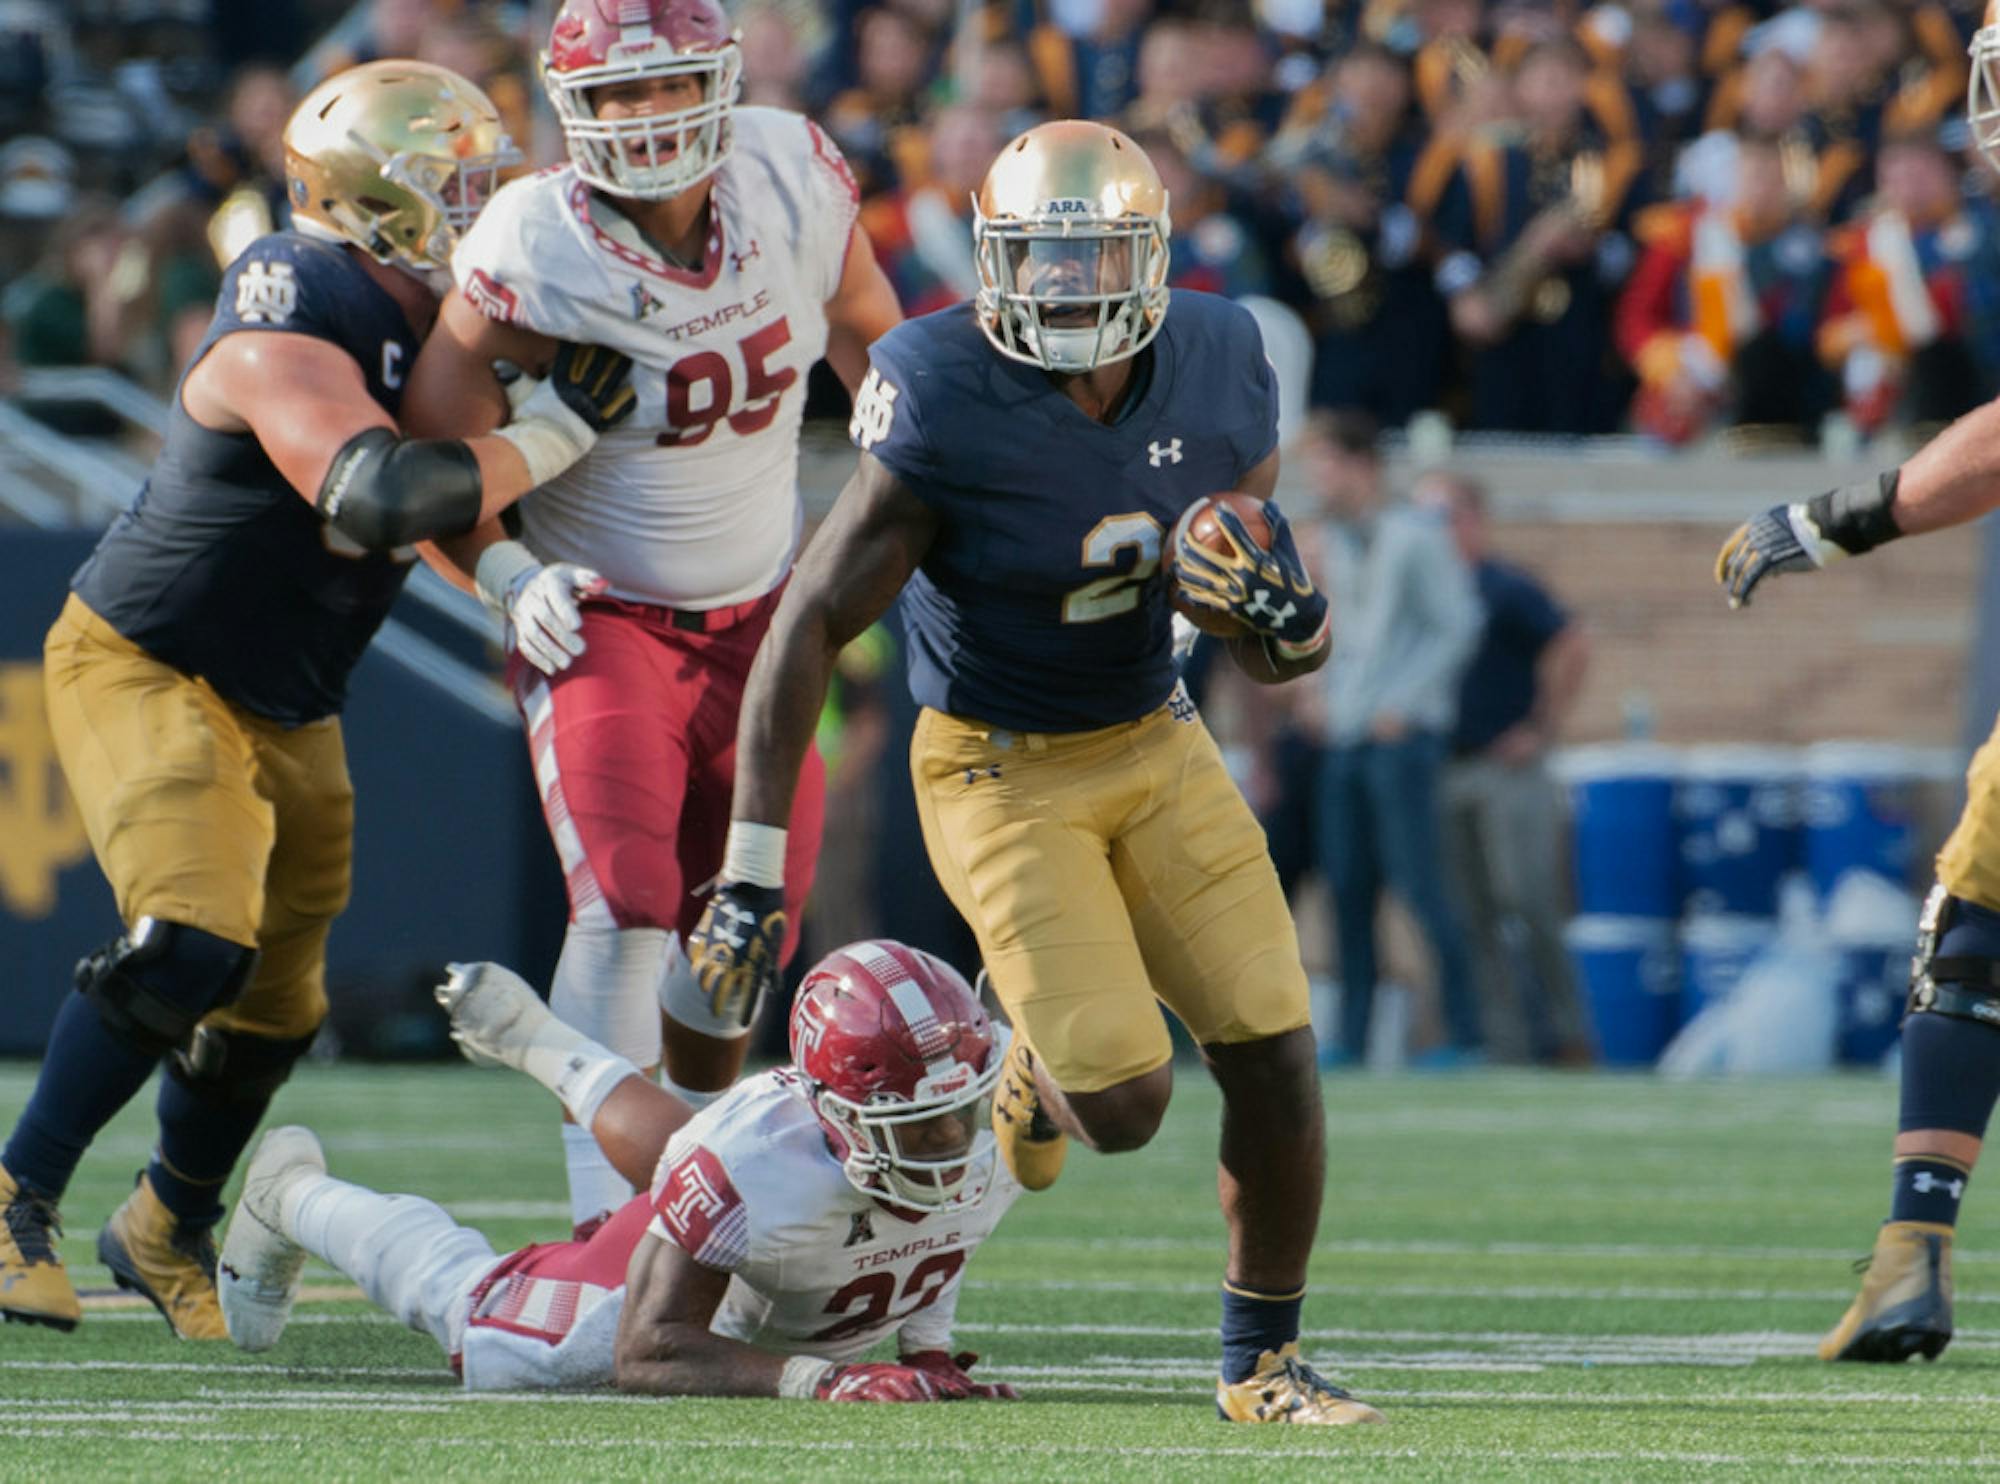 Irish junior running back Dexter Williams eludes a defender and looks upfield during Notre Dame’s 49-16 win over Temple at Notre Dame Stadium. Williams had 124 yards on just six carries and one touchdown.